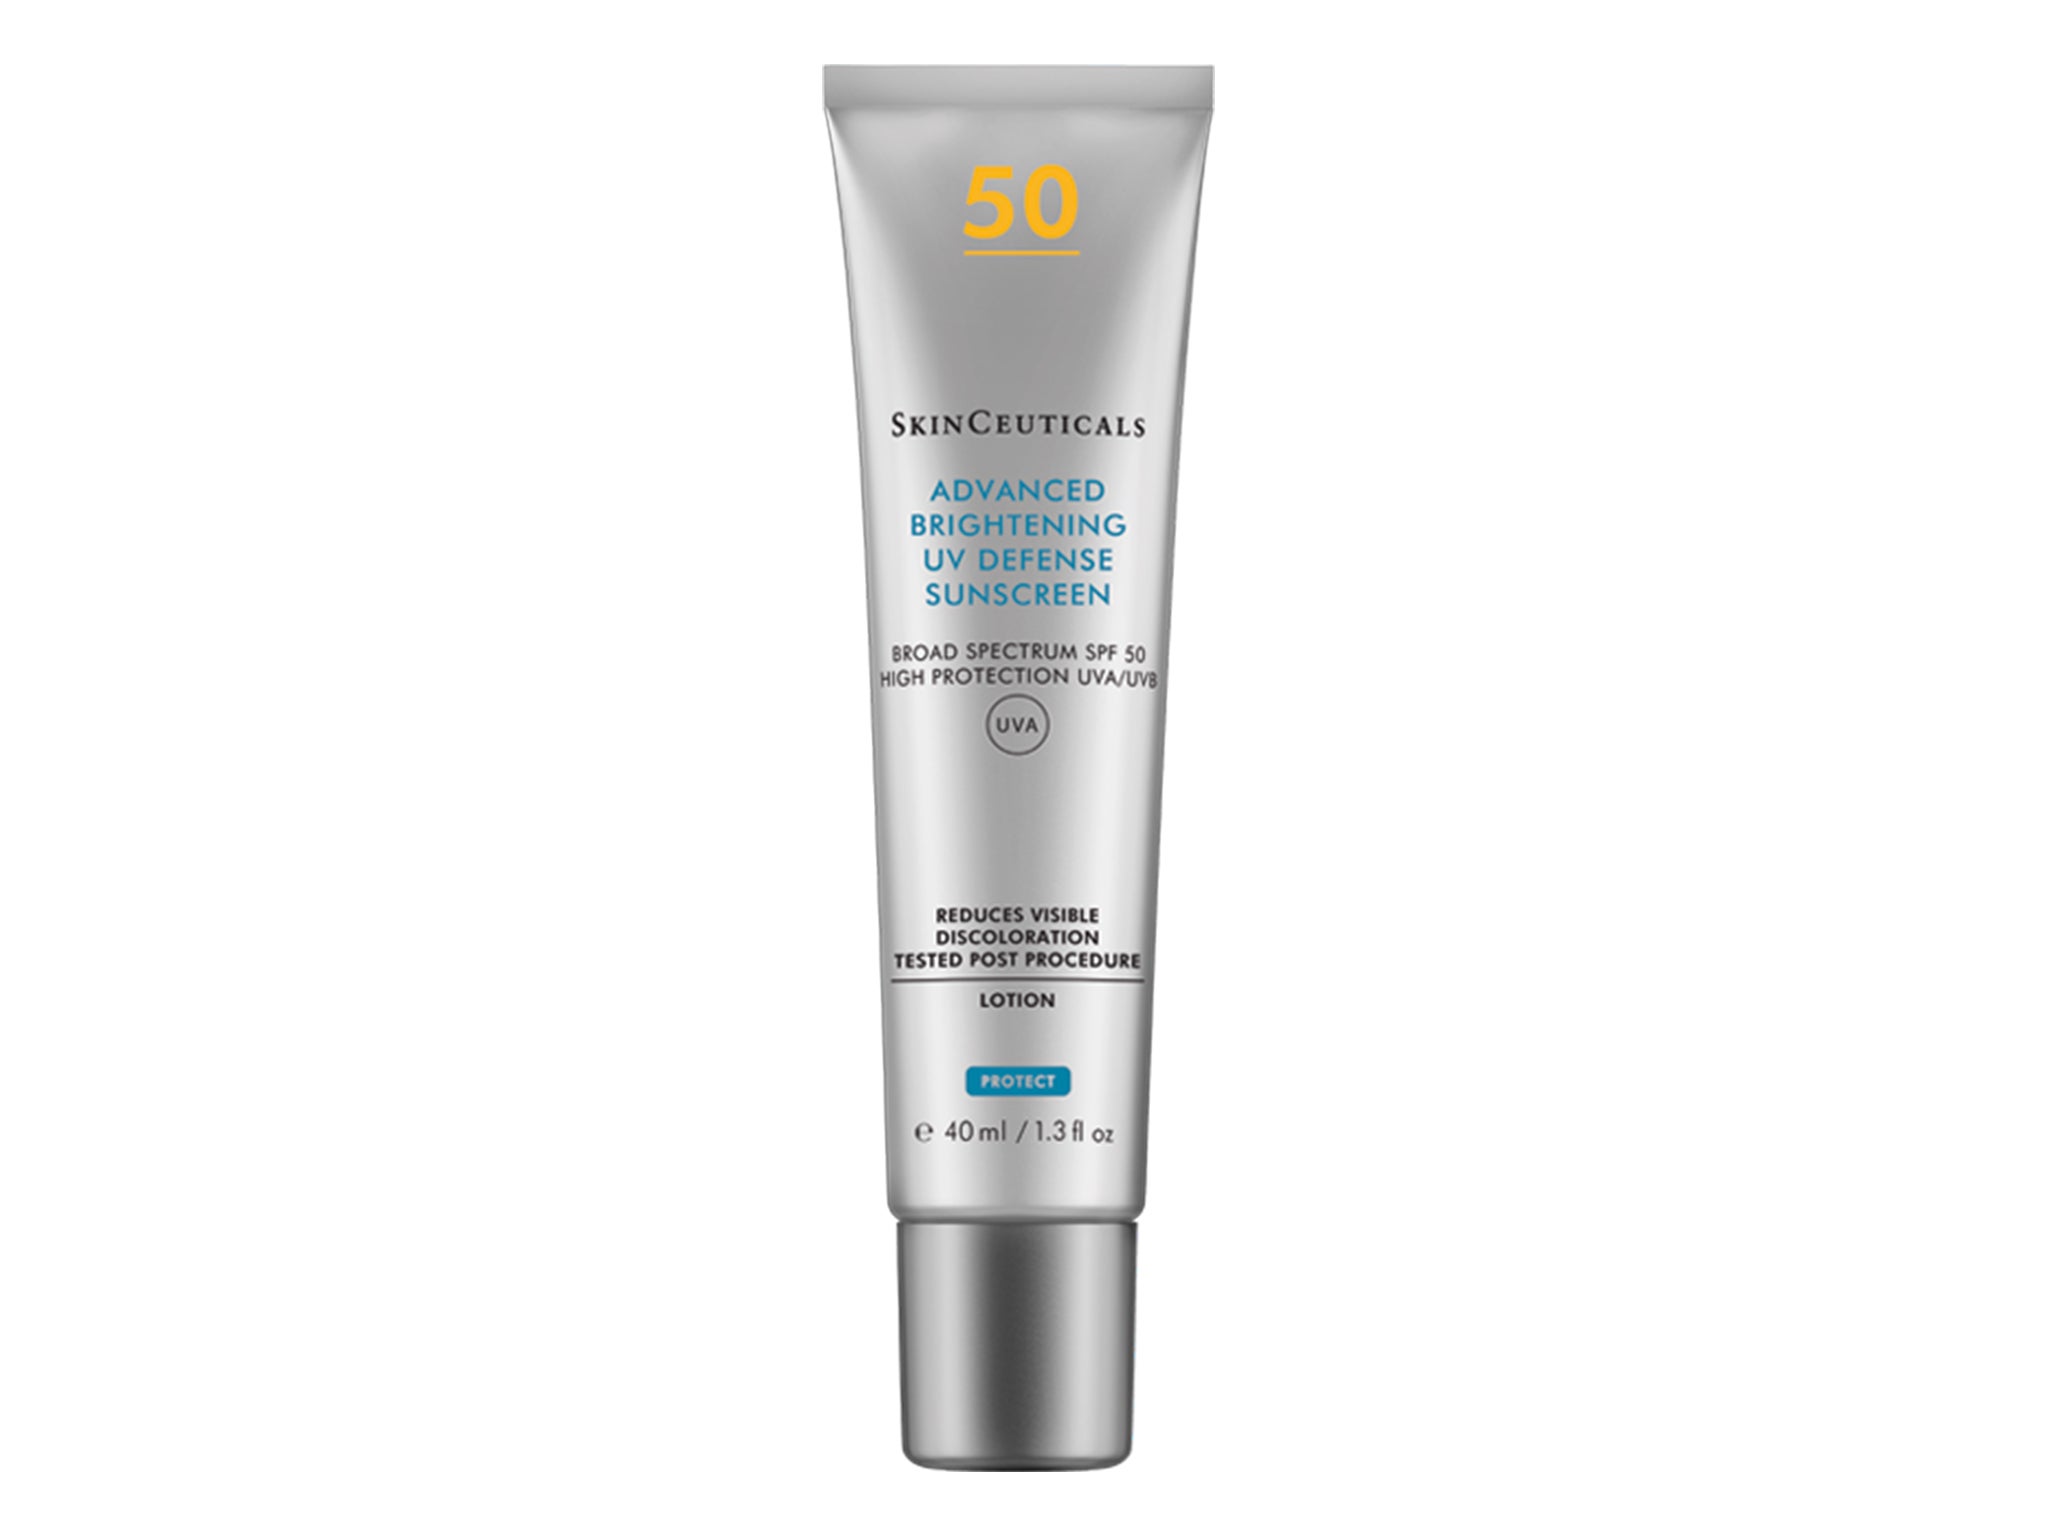 Wearing SPF is vital in protecting your skin from UV rays and preventing hyperpigmentation